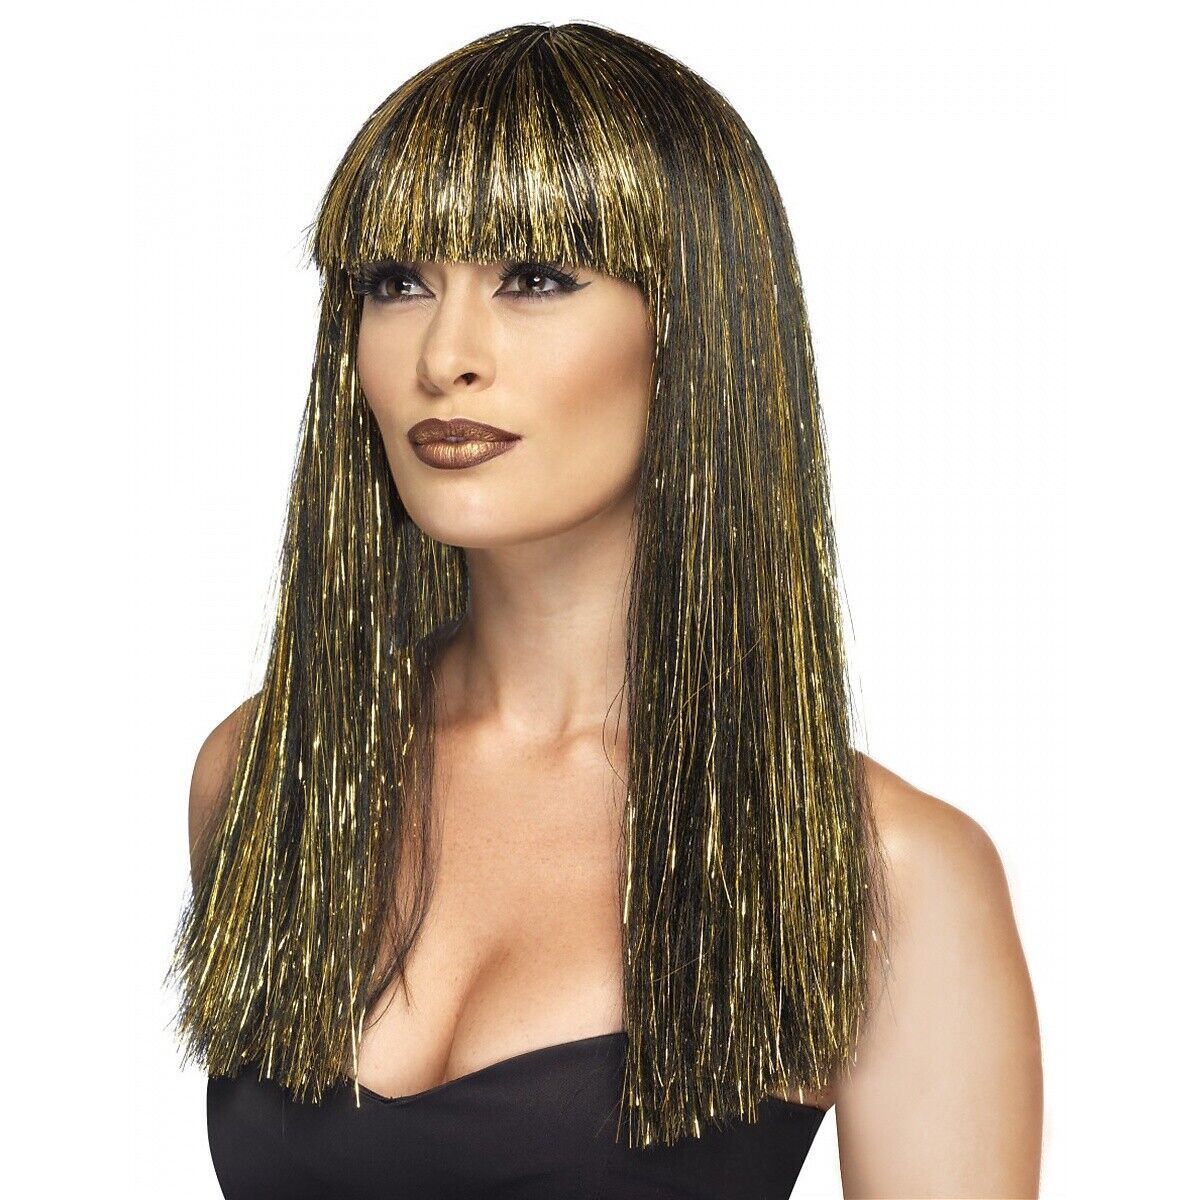 Egyptian Wig For Adult Womens Goddess Cleopatra Costume Halloween Fancy Dress